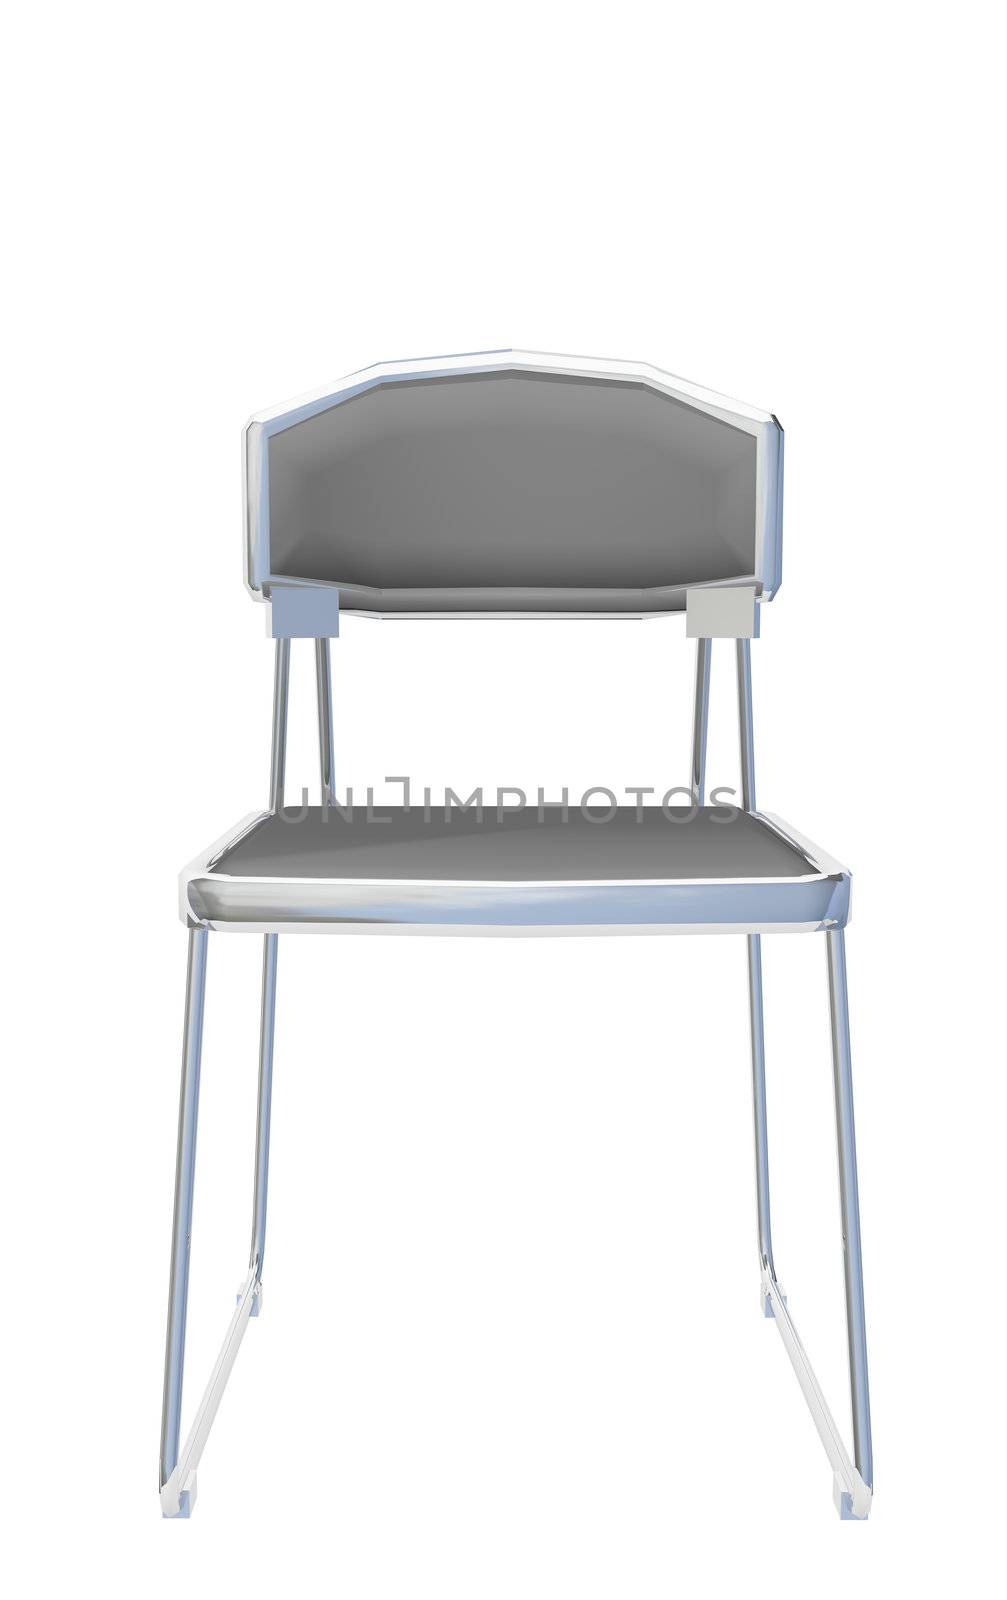 Modern simple gray metallic chair, isolated against a white background.